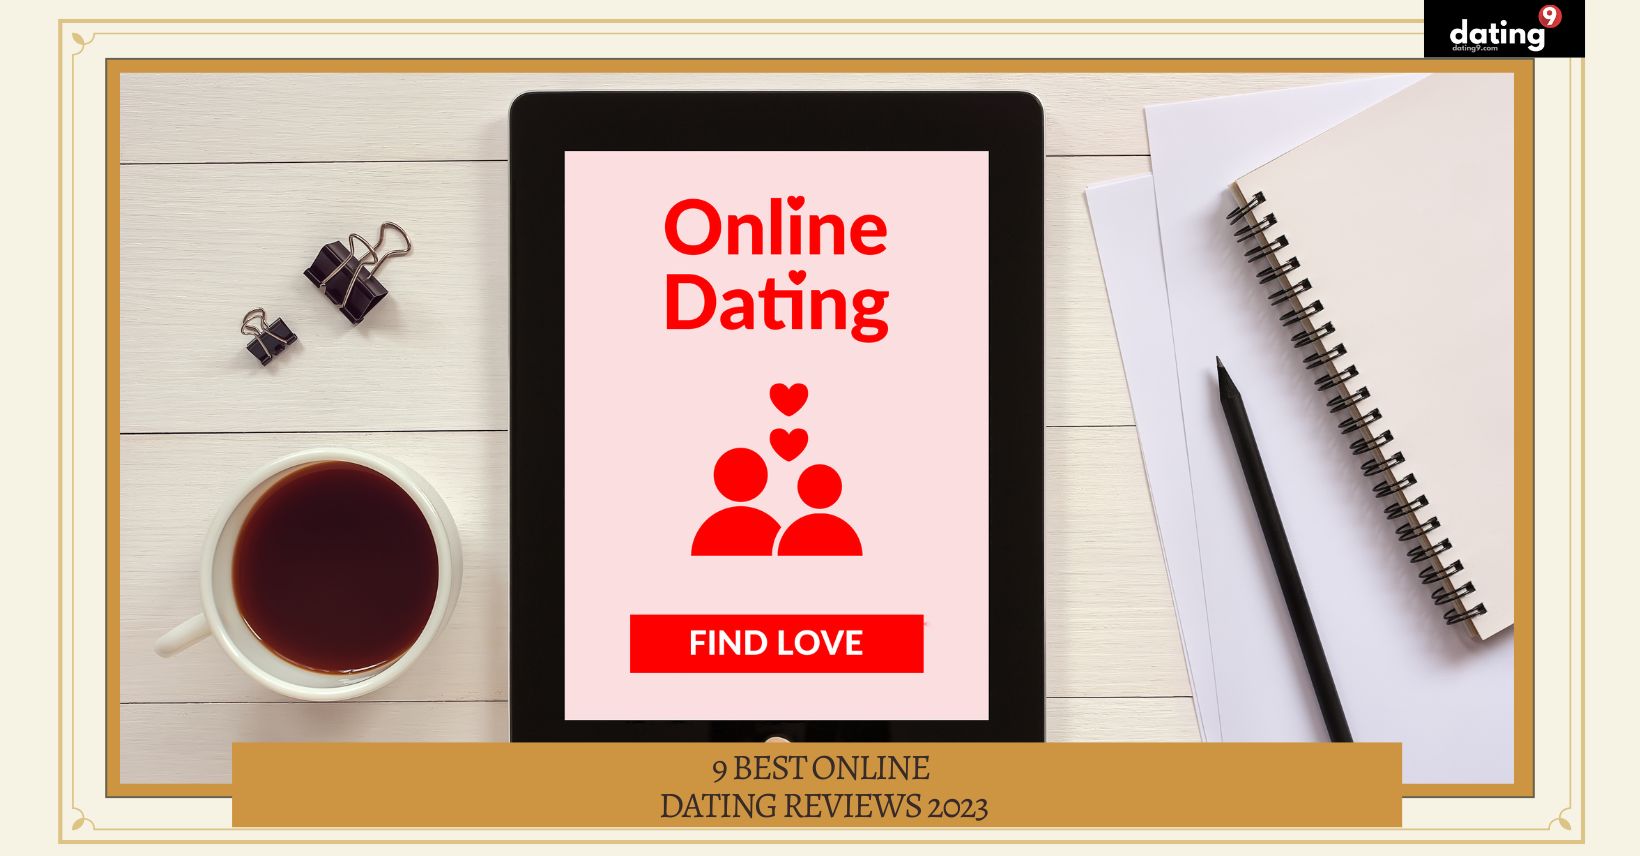 Best Online Dating Reviews 2023